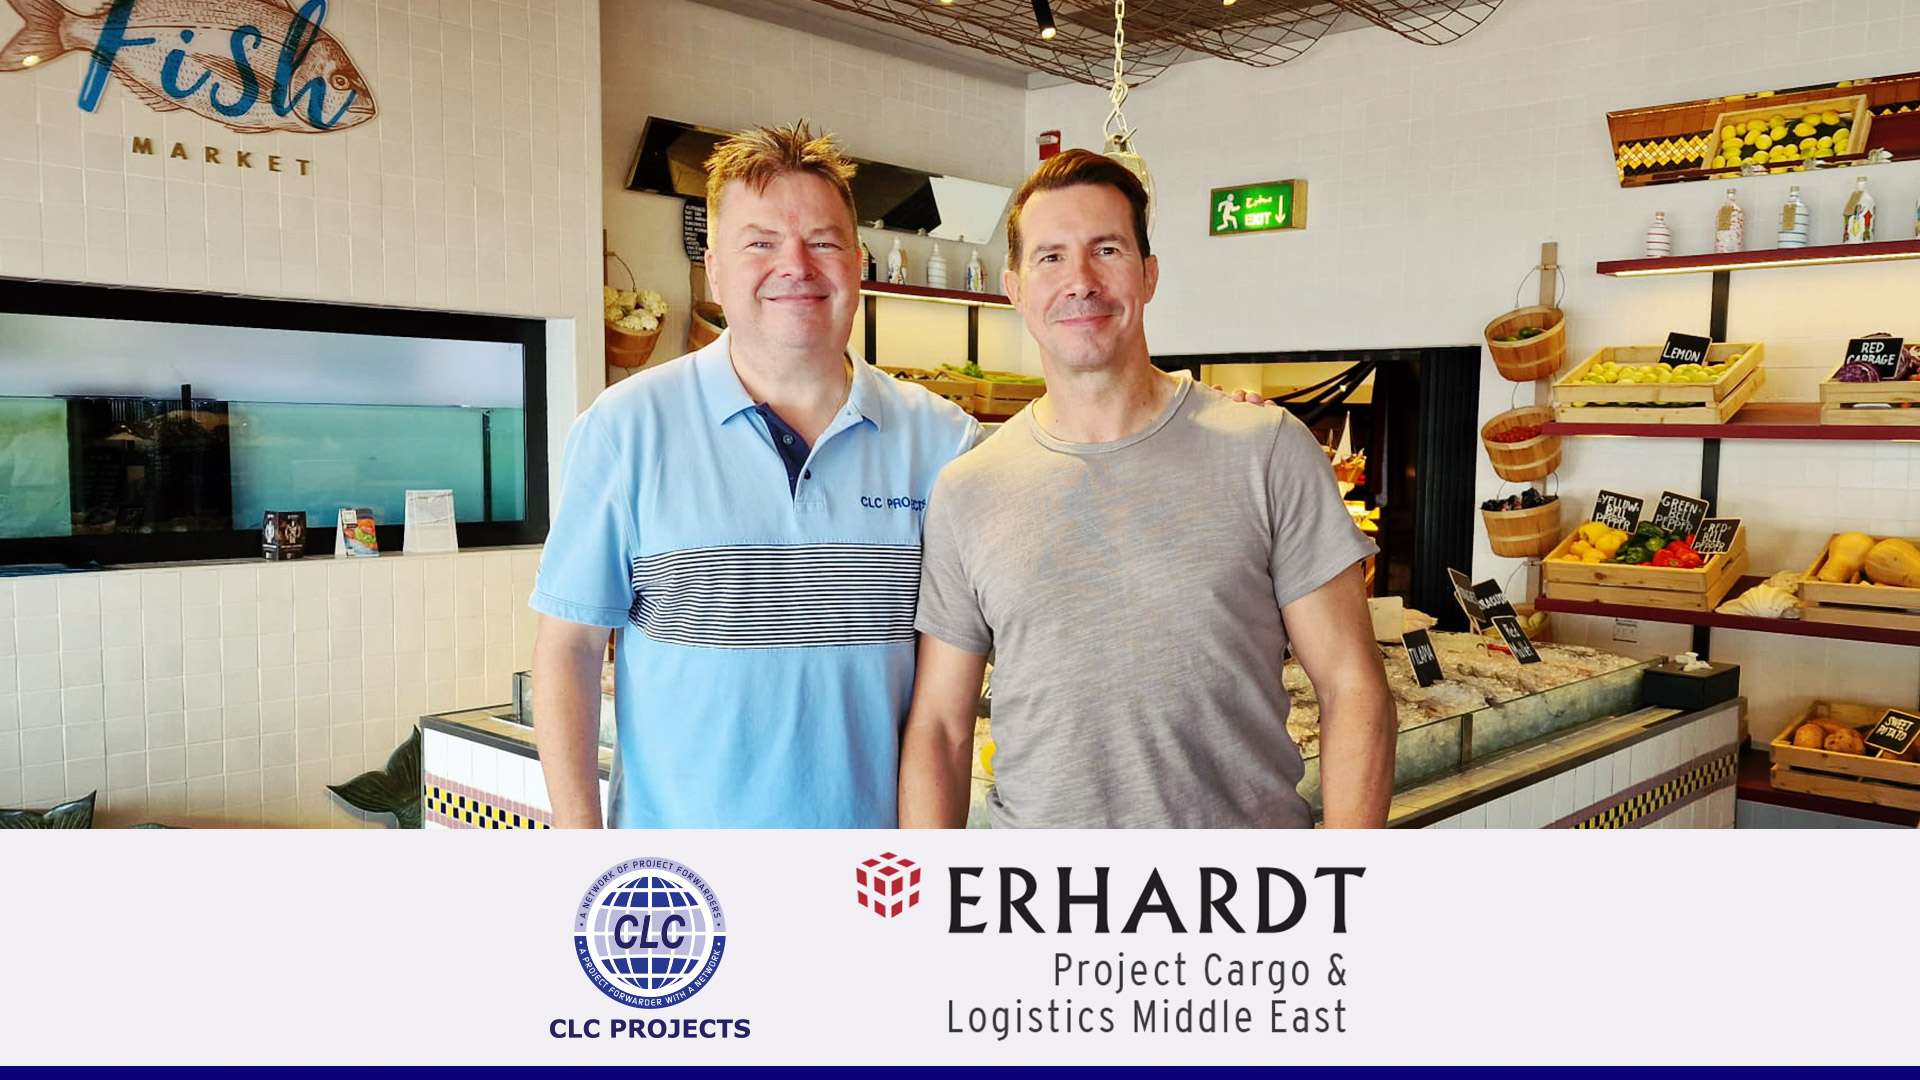 CLC Projects Chairman with Andrew James Hall, Managing Director at Erhardt Project Cargo & Logistics Middle East in Dubai UAE